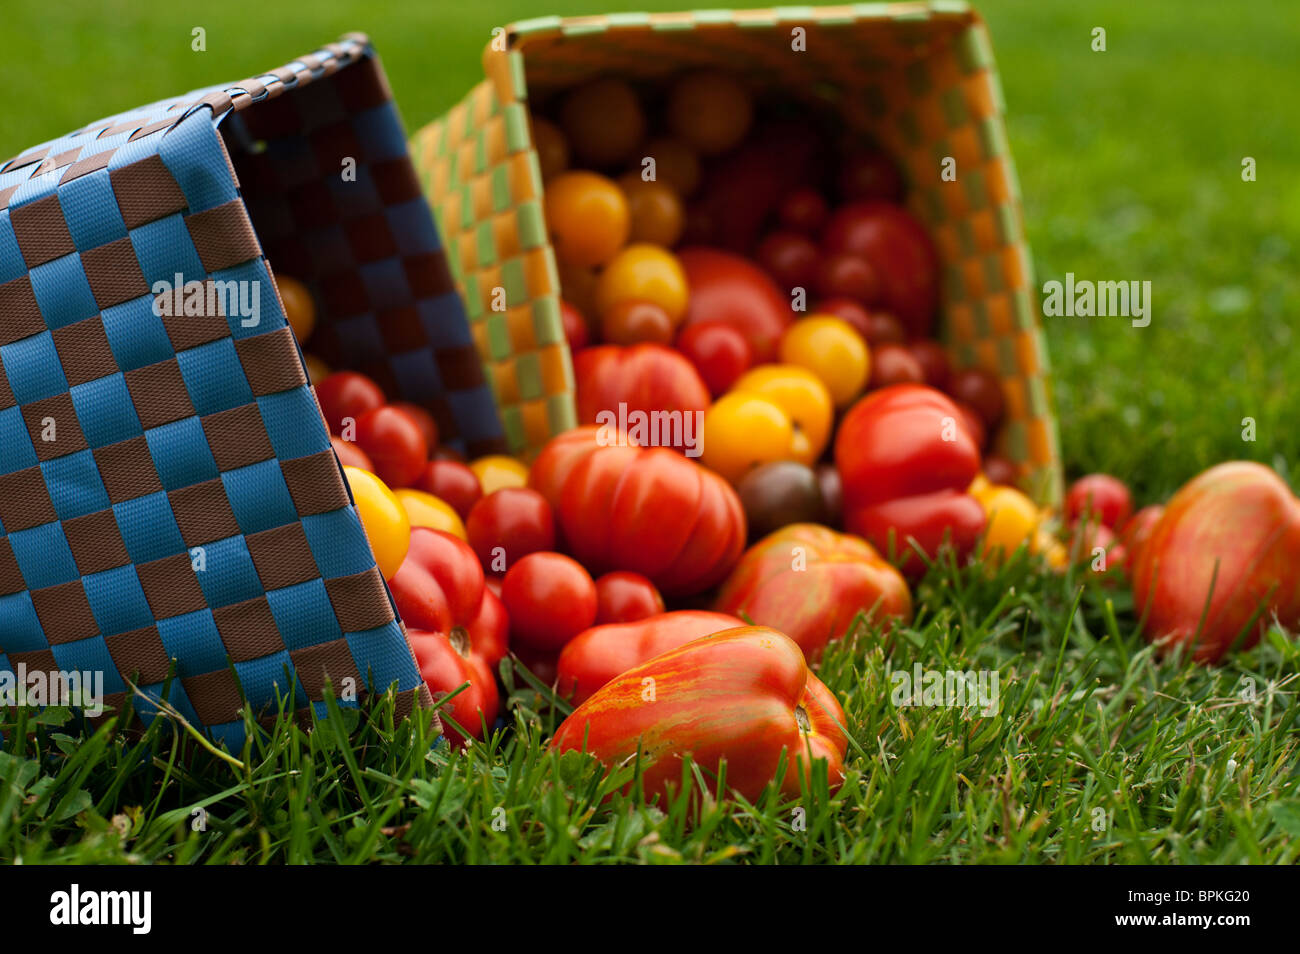 Heirloom tomato varieties spill from woven boxes onto the grass. Stock Photo